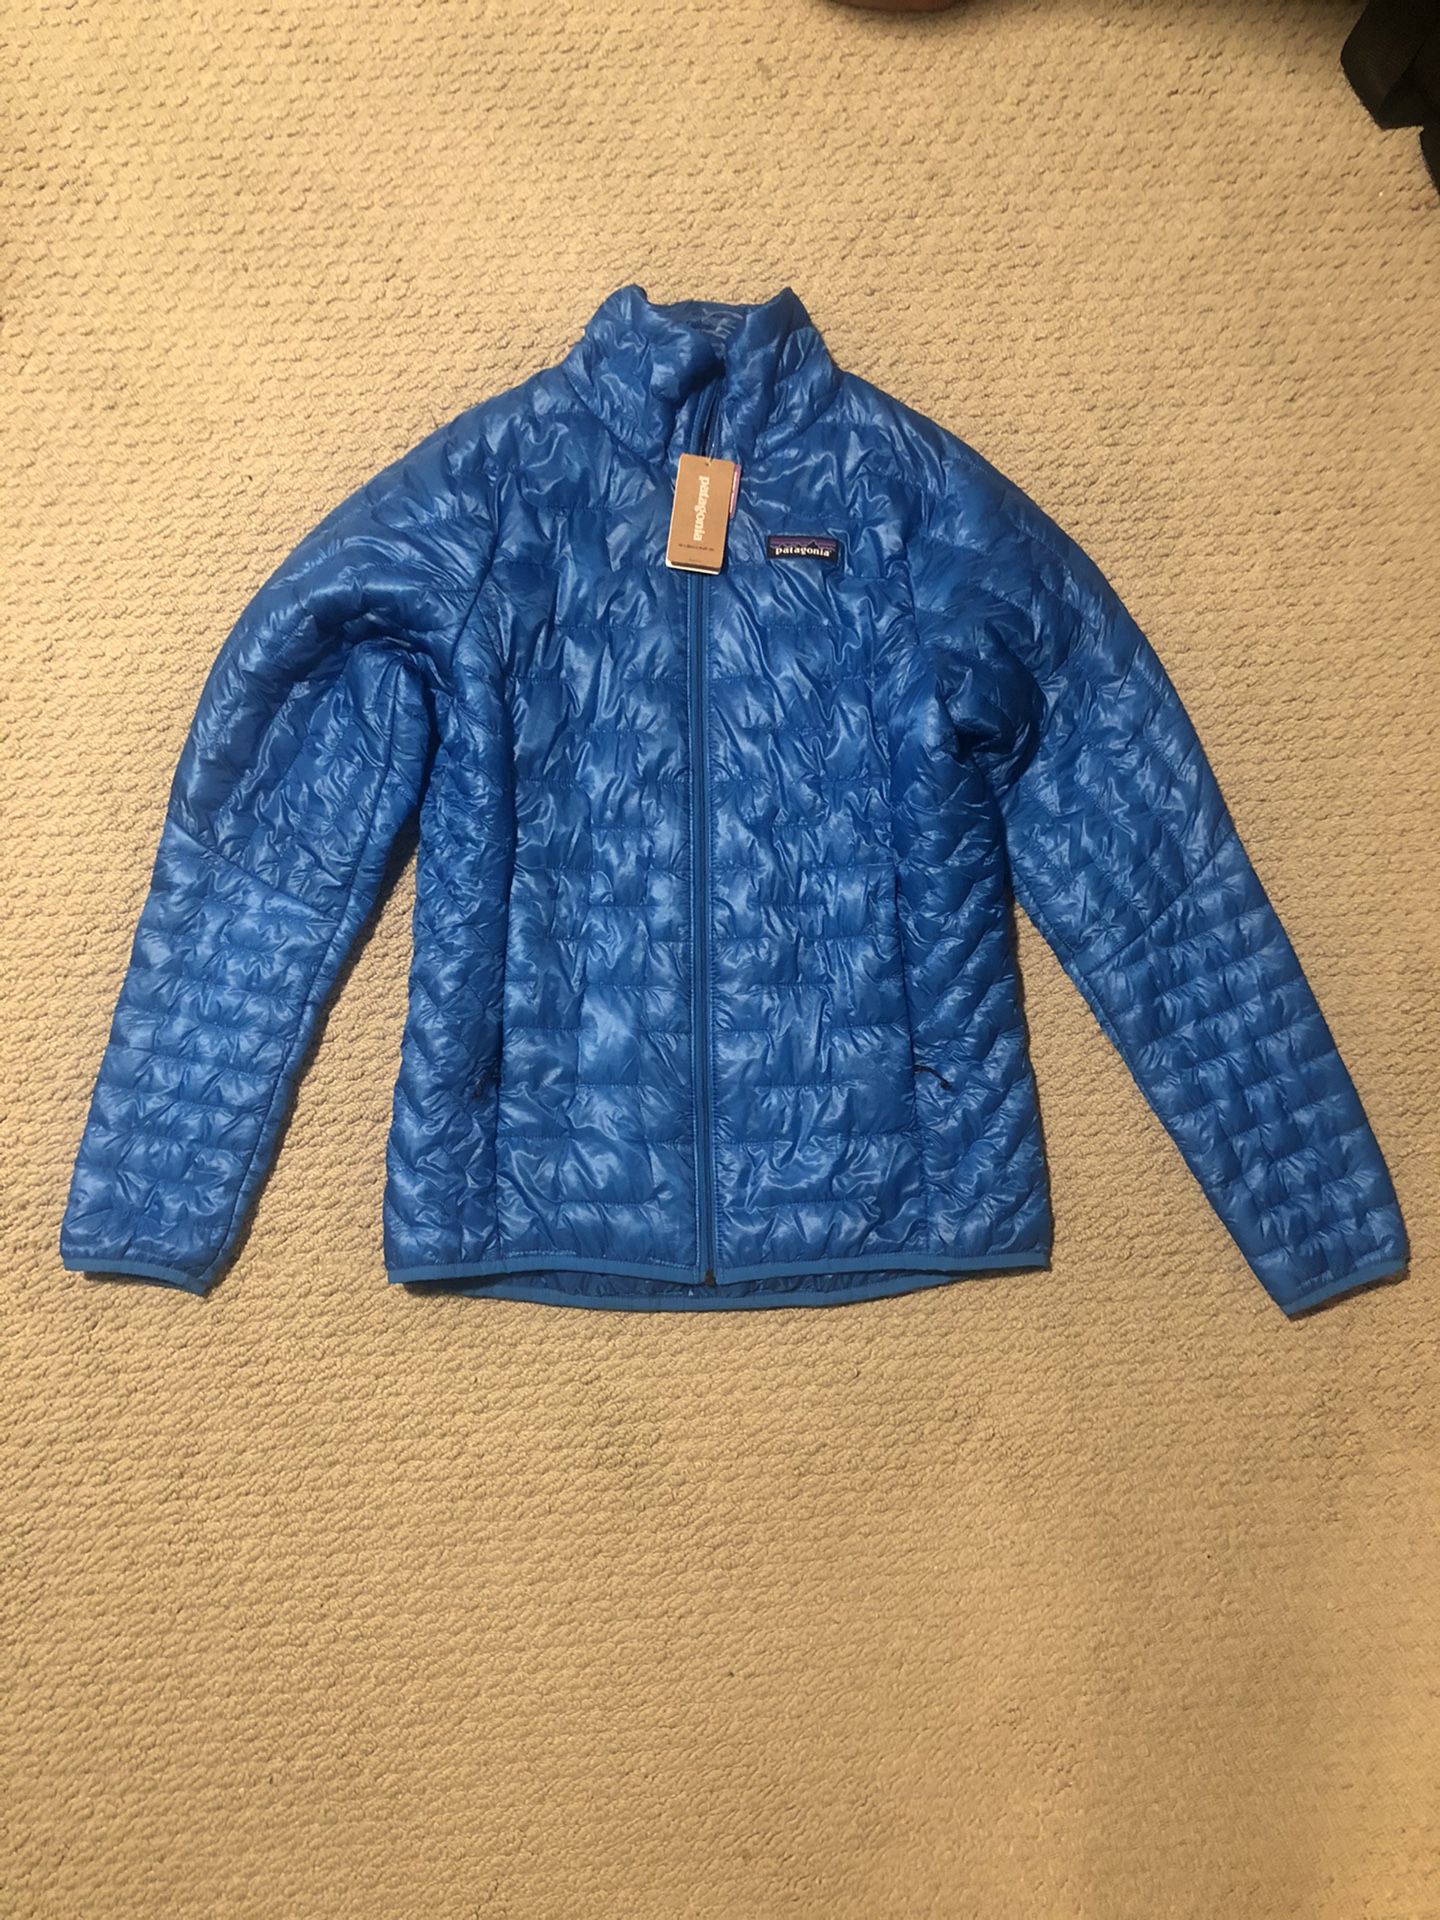 Patagonia Womens Micro Puff jacket, Lápiz Blue, Size Small, New & Never used